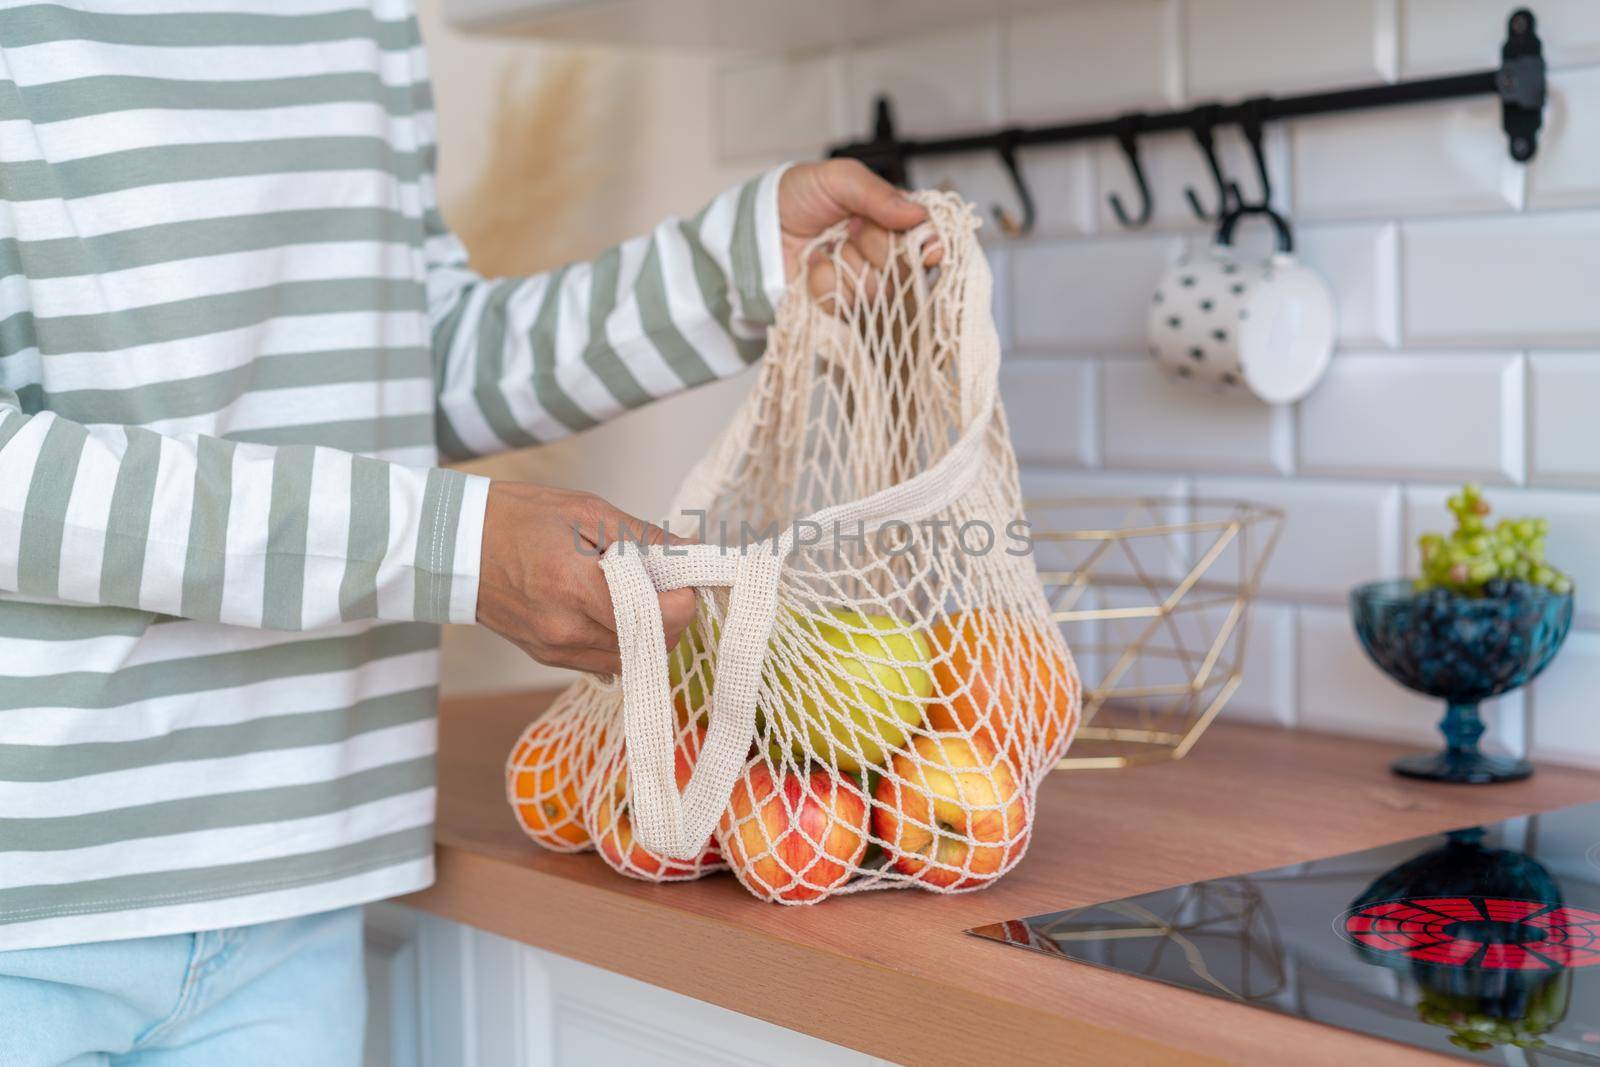 Faceless female buying fruits in eco bag. Sorting green and red apples, oranges in kitchen. Eco-friendly shopping concept. Vegetarian healthy products. Sustainable alternative. Plastic free package